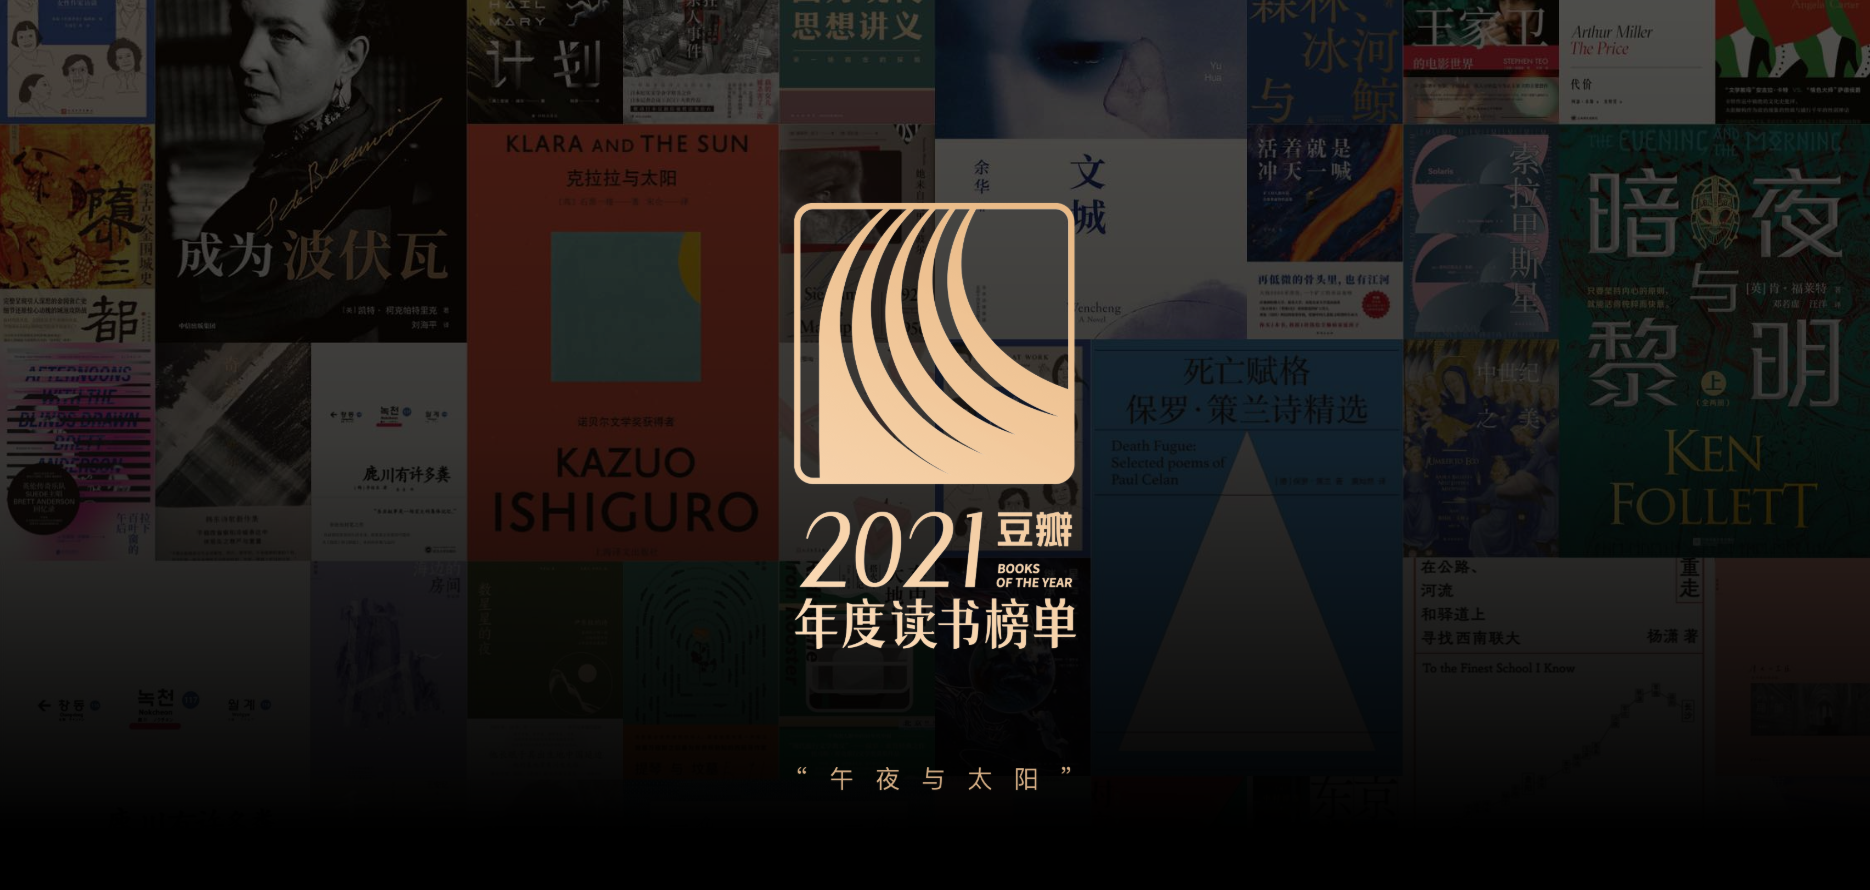 Which ten books will receive the most attention in China in 2021?